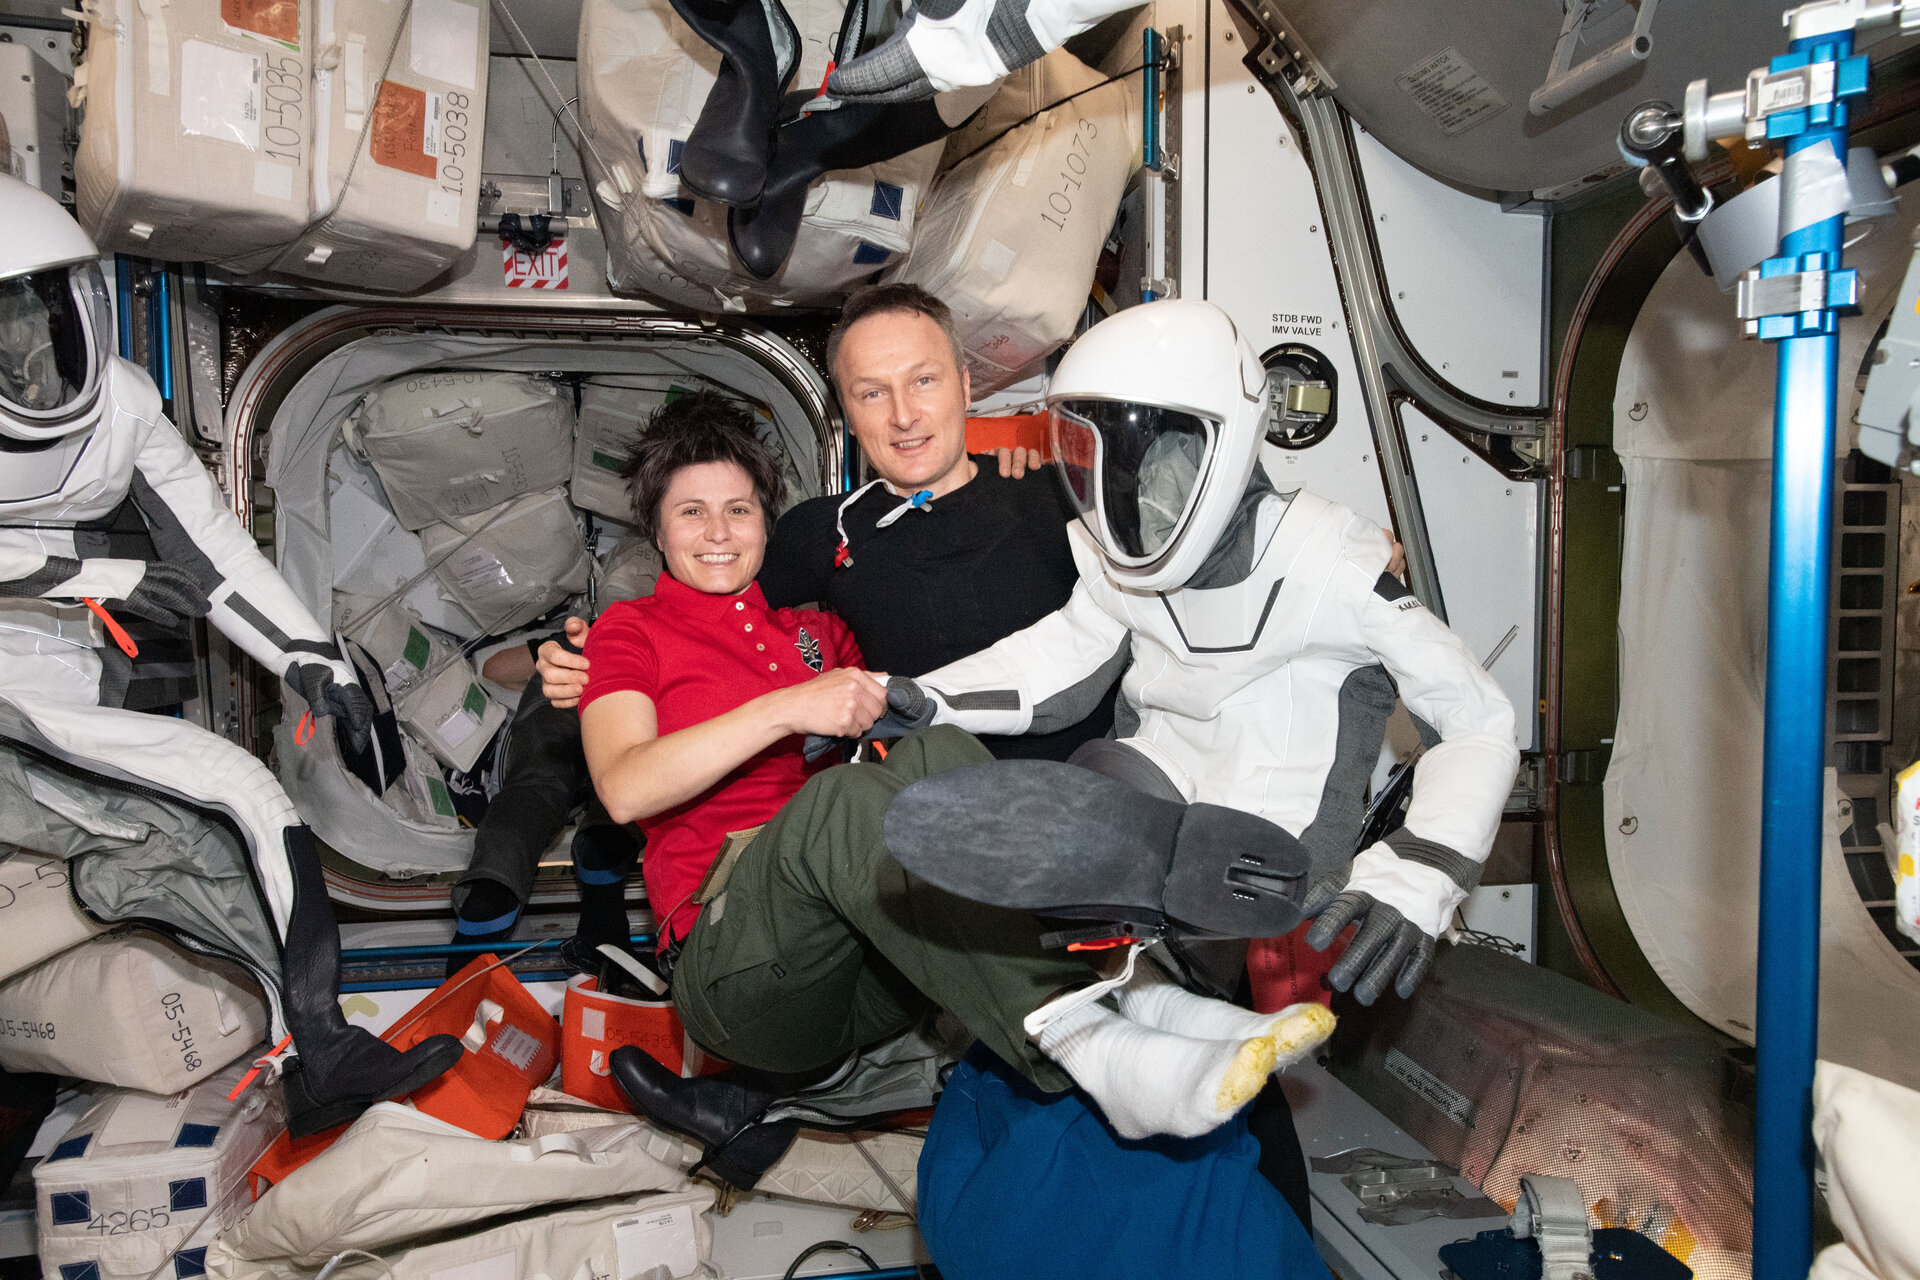 Samantha and Matthias with a SpaceX spacesuit in orbit